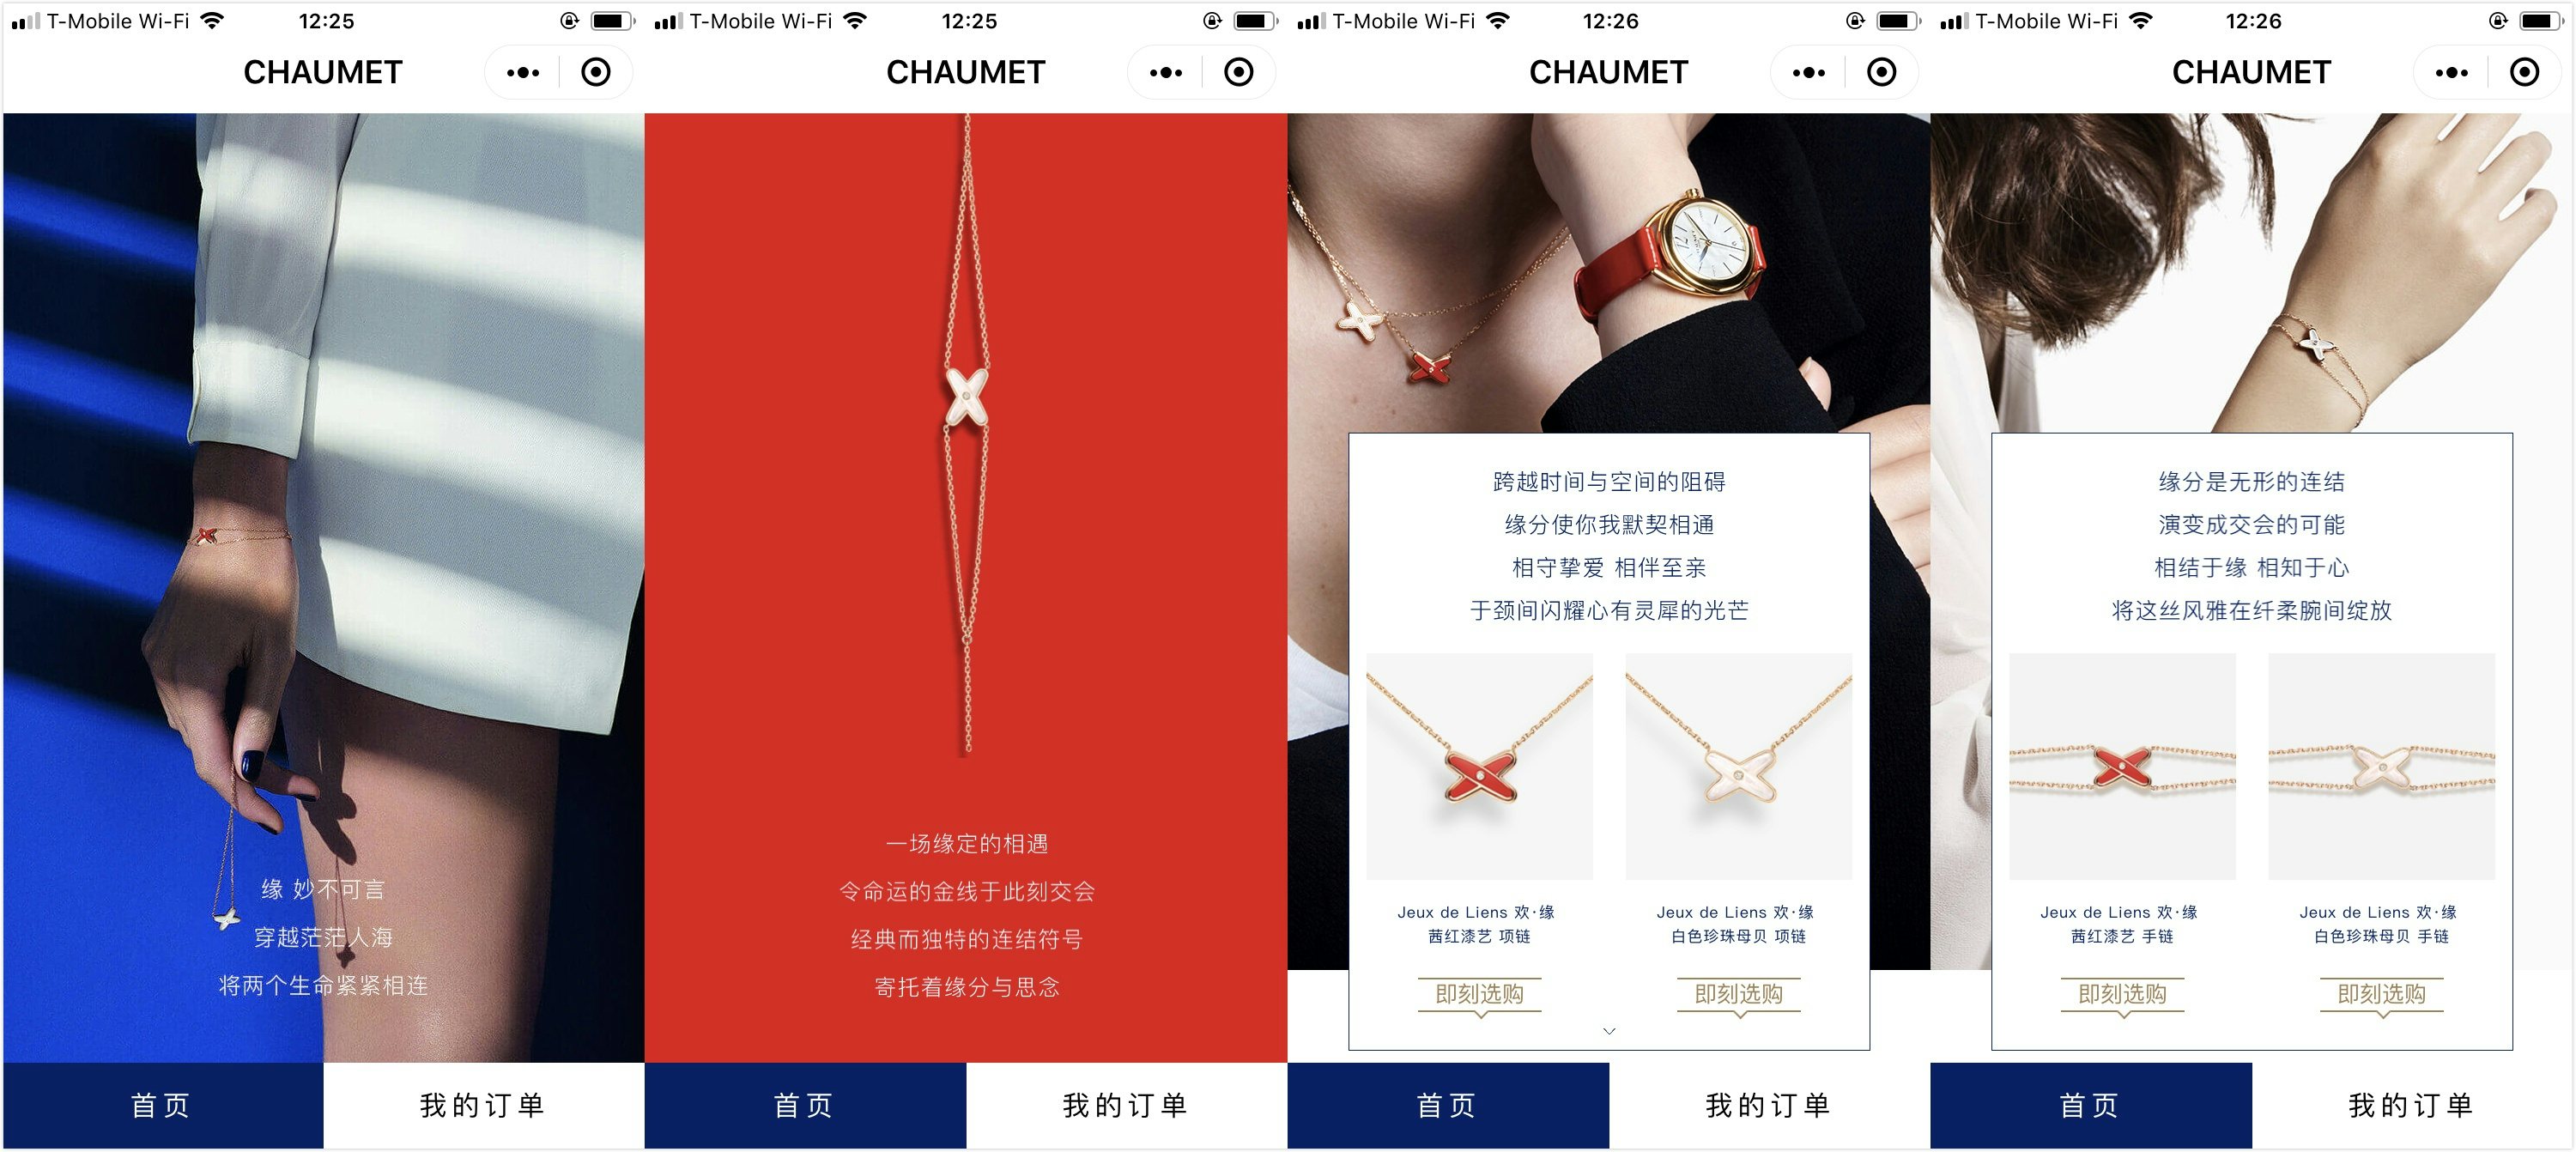 Chaumet started to sell jewelry pieces on WeChat to wealthy Chinese consumers this week. Photo: Jing Daily illustration